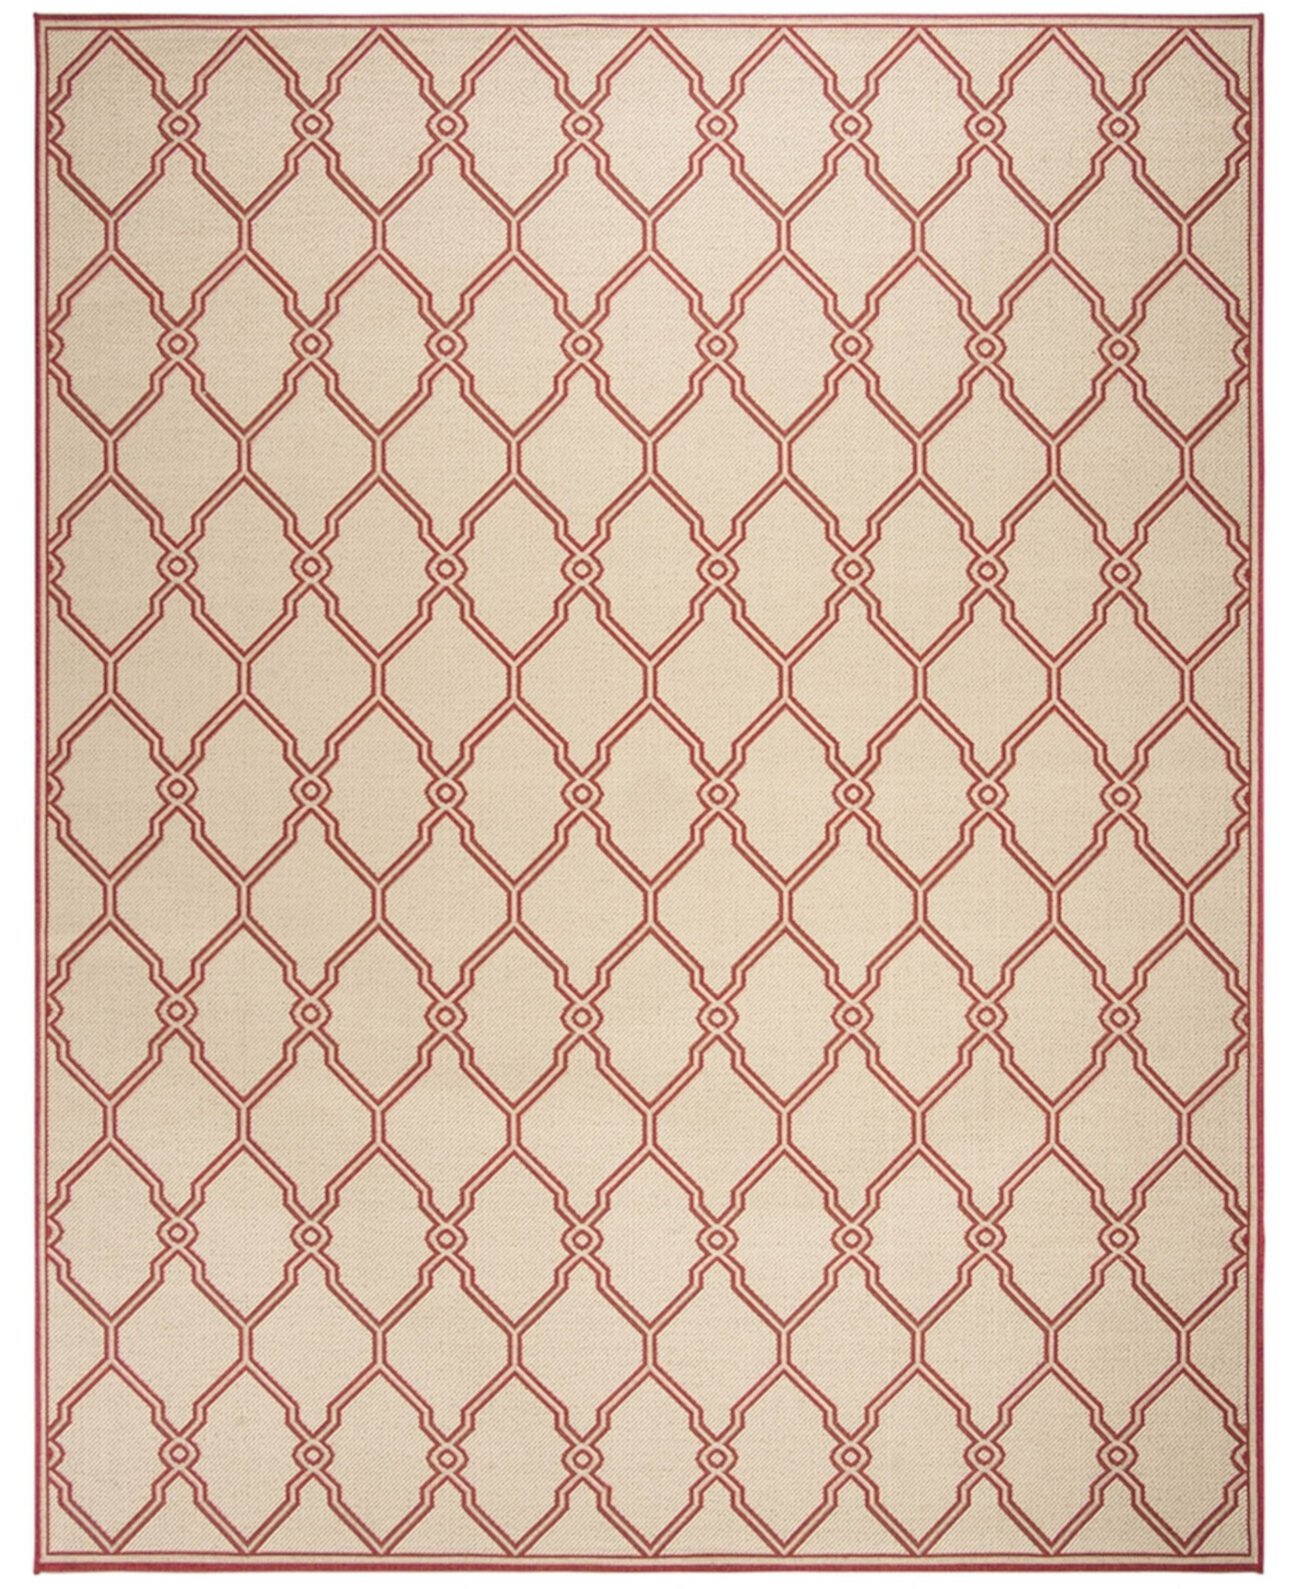 Linden Red and Creme 8' x 10' Area Rug Safavieh